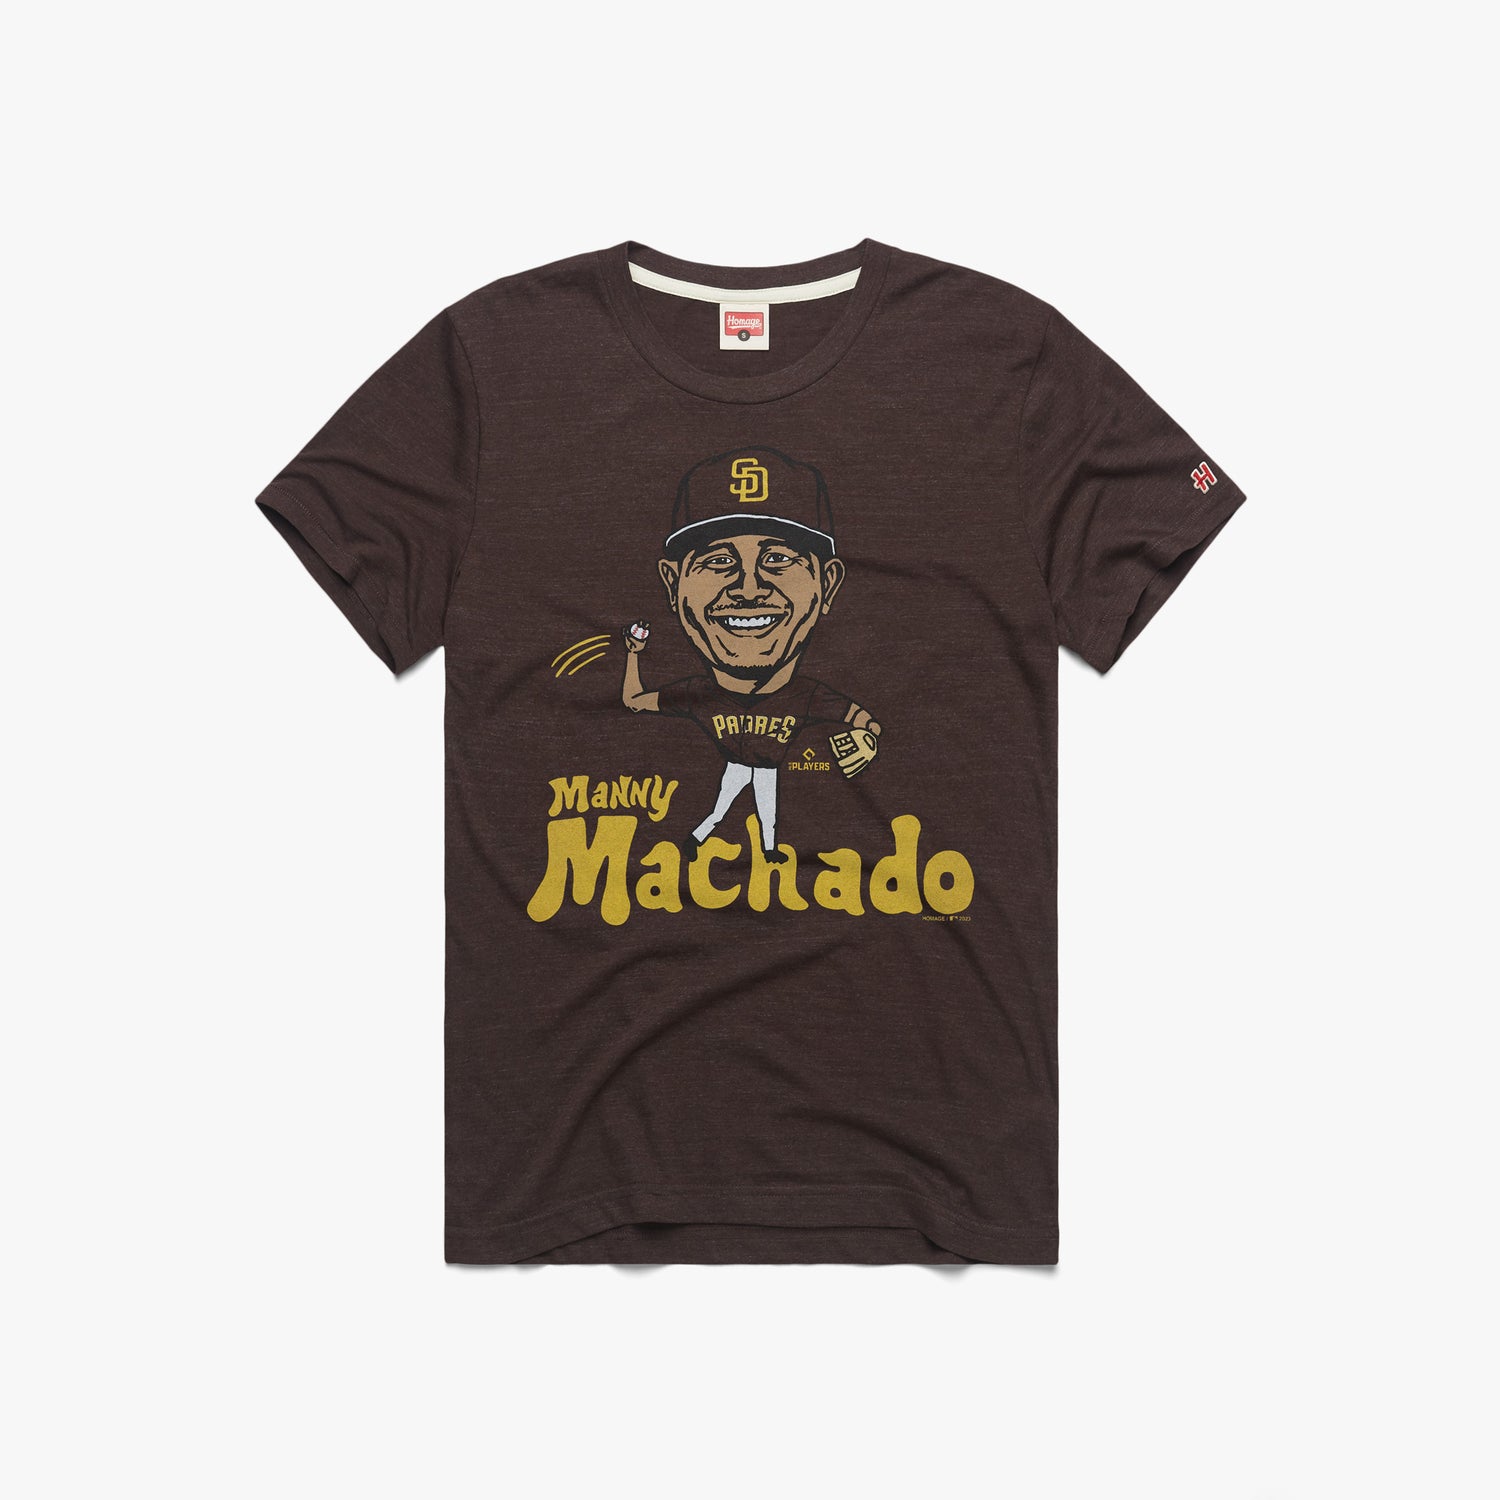 Padres Manny Machado T-Shirt from Homage. | Brown | Vintage Apparel from Homage.